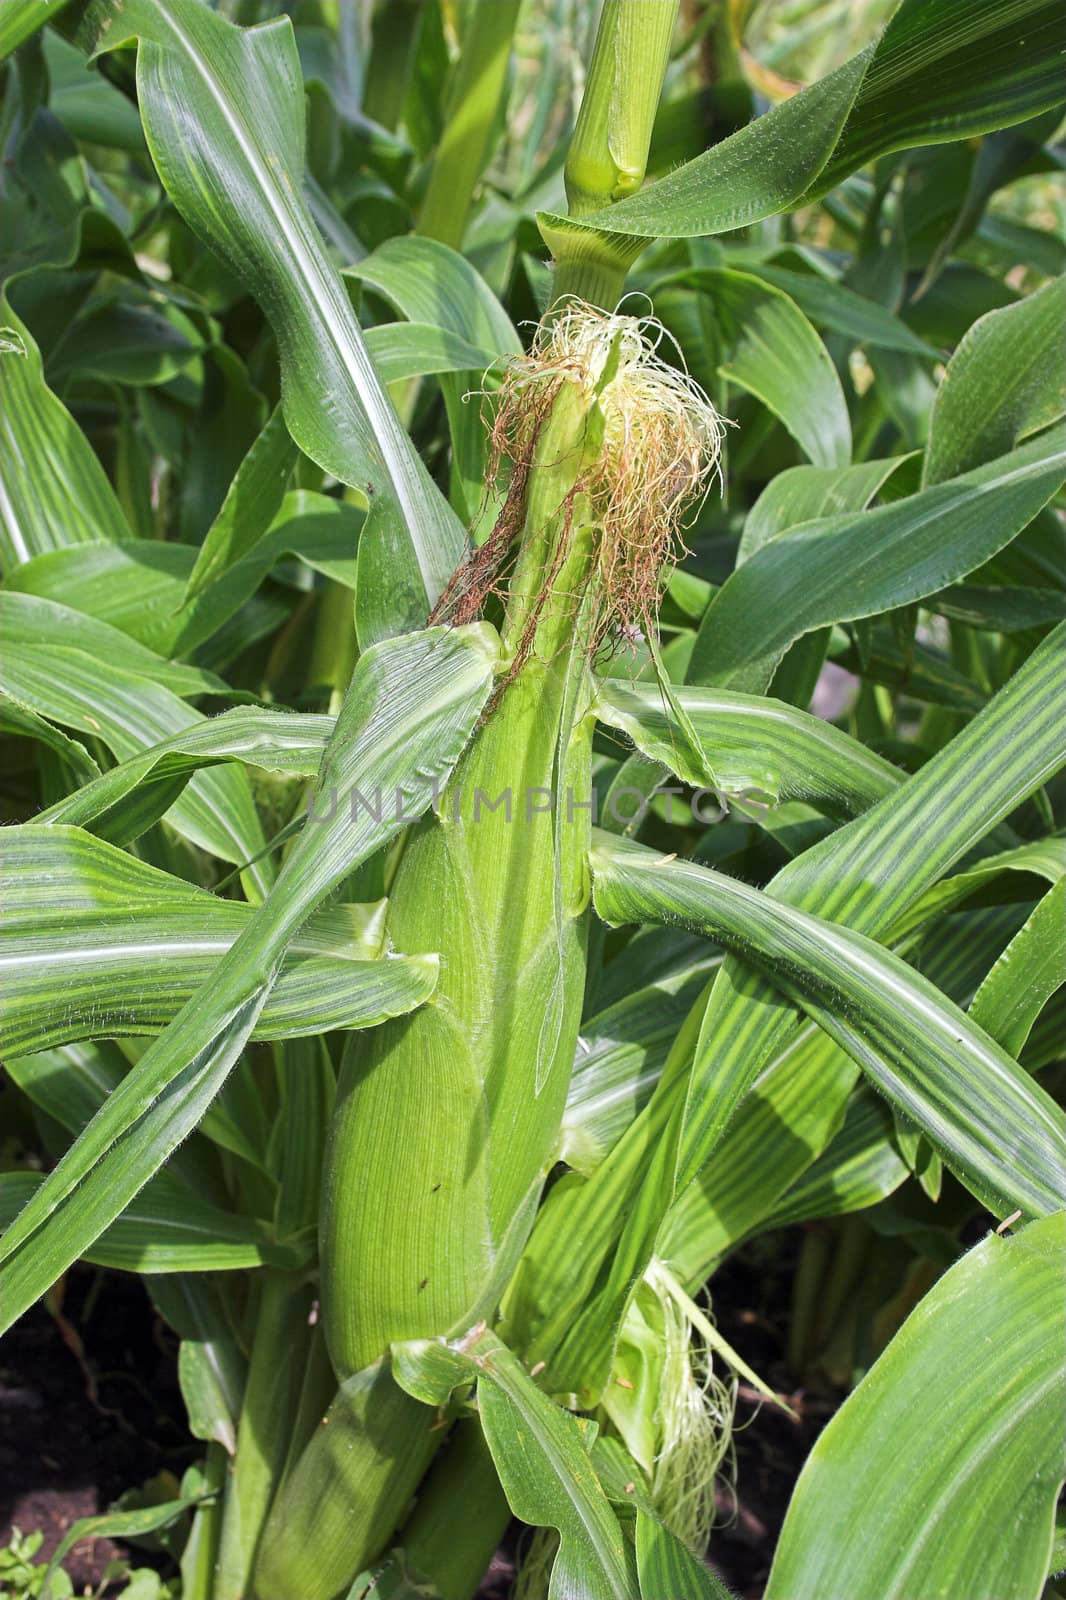 A sweetcorn cob growing on the plant